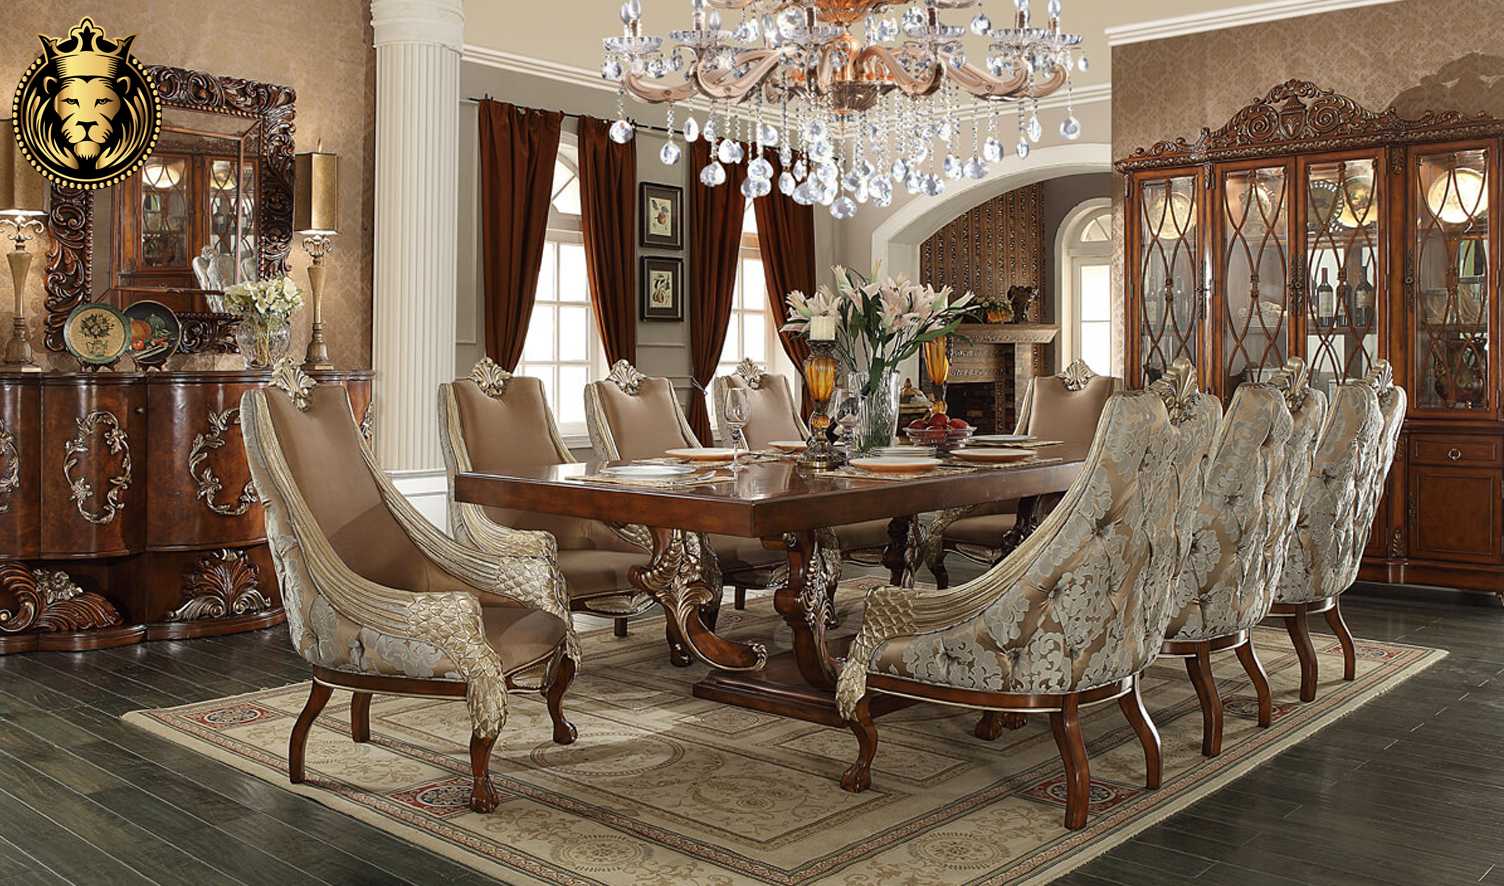 Luxury dining table india